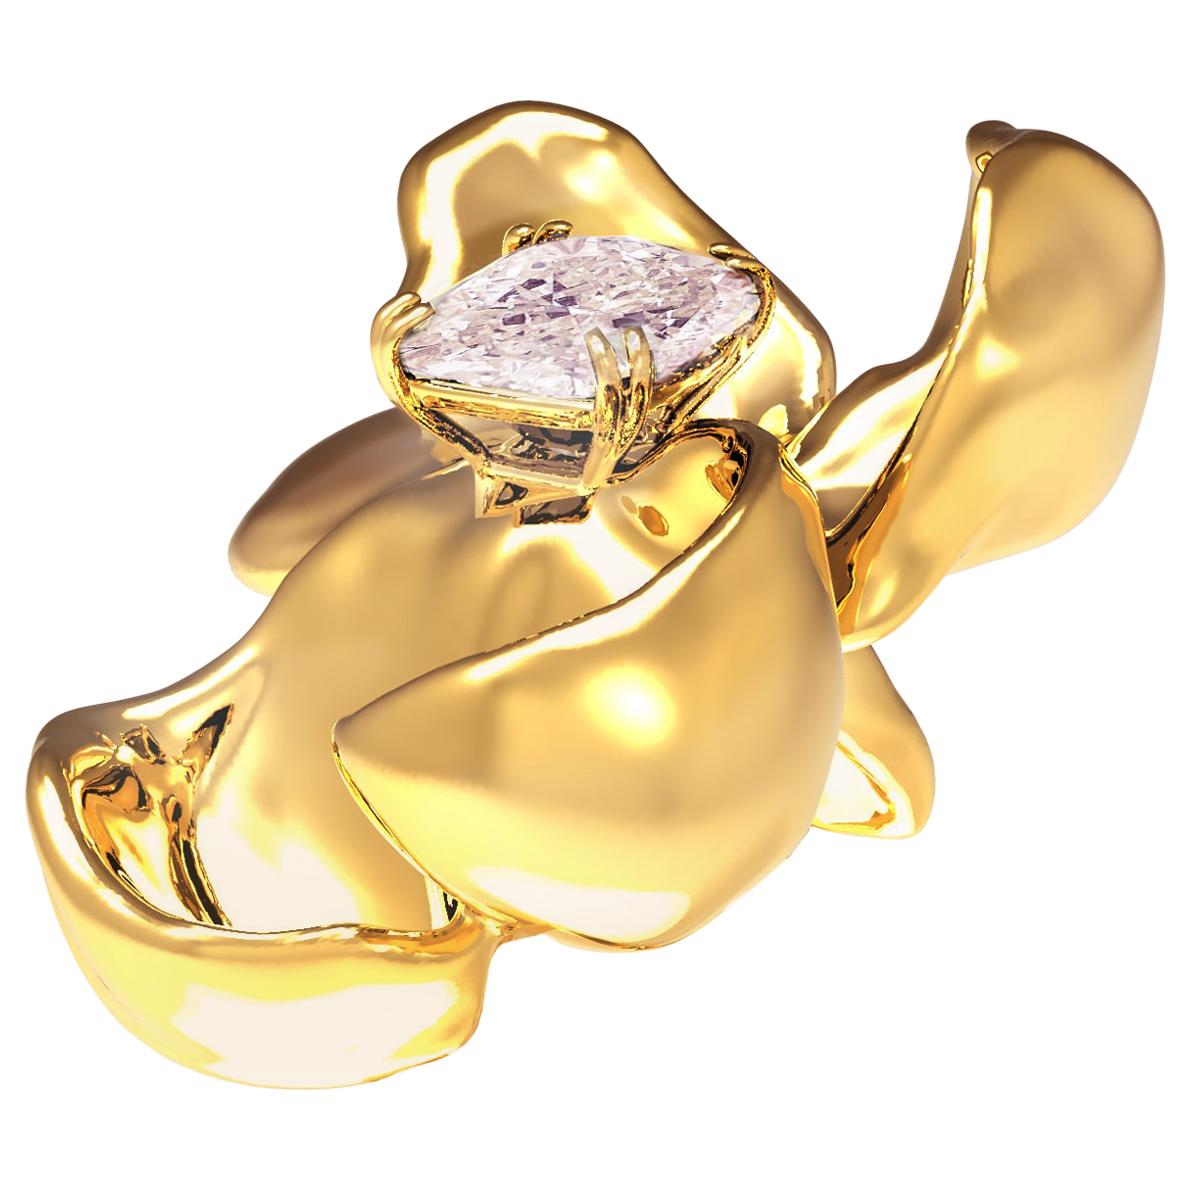 Yellow Gold Contemporary Brooch with GIA Certified Fancy Purple Pink Diamond